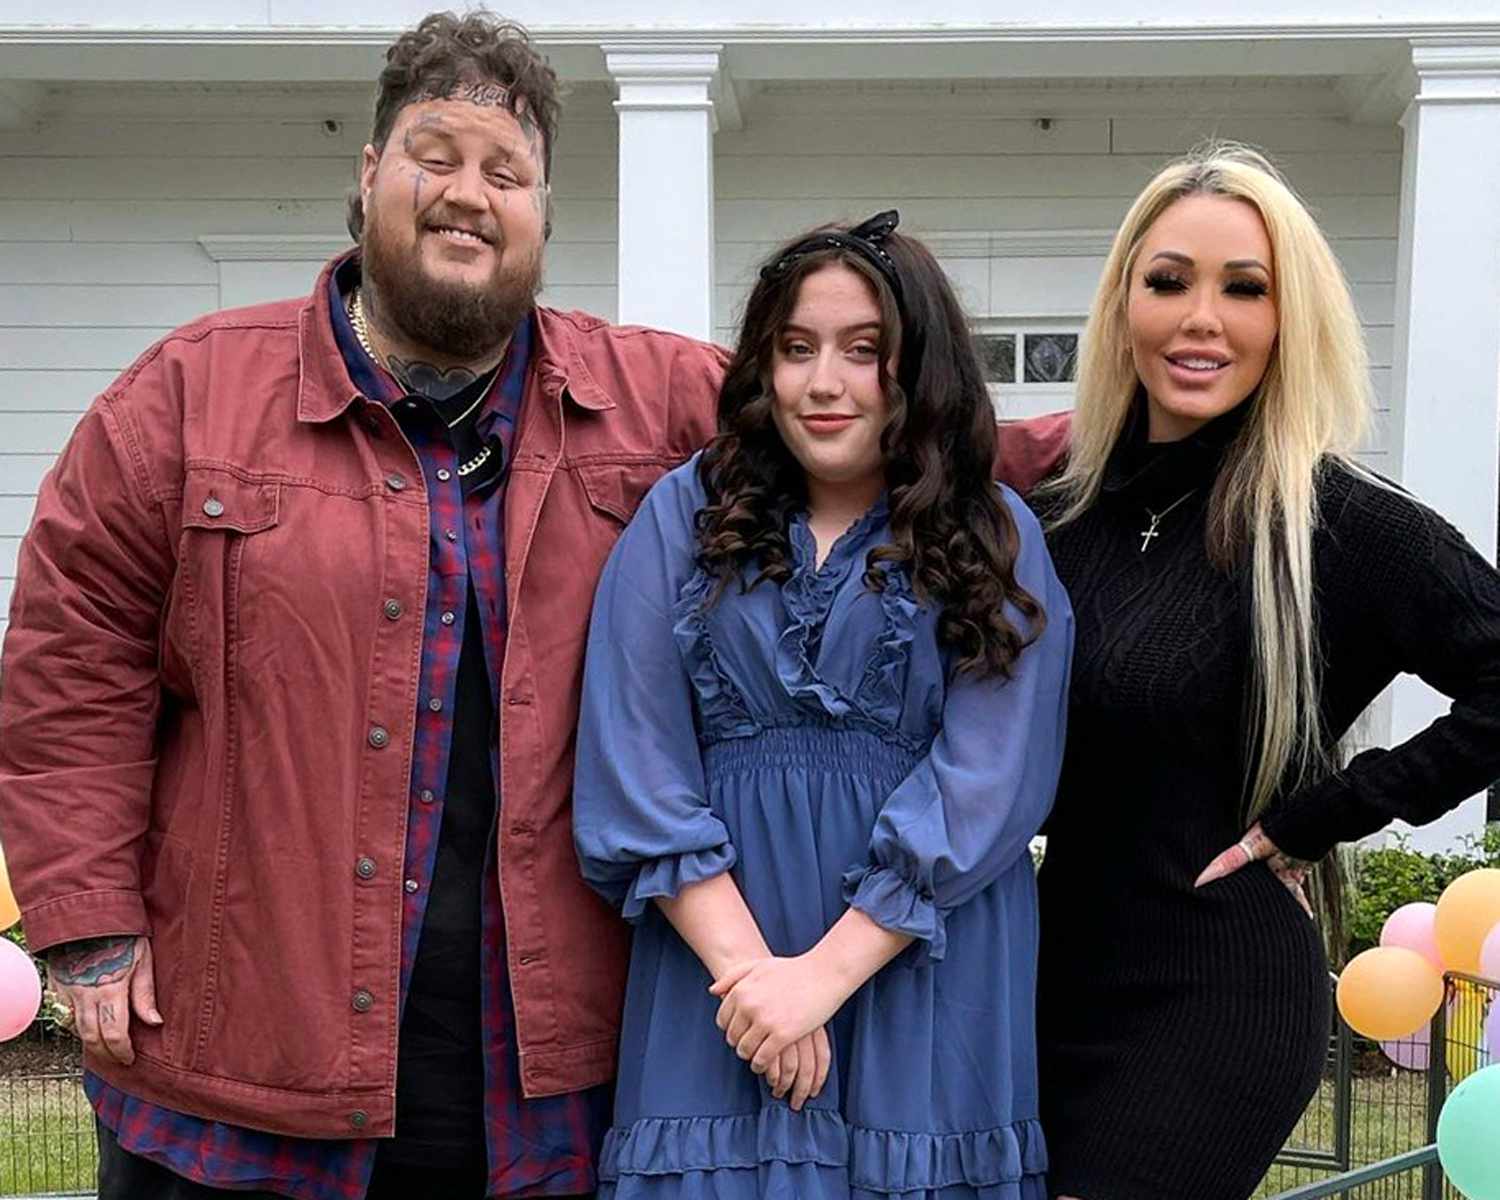 Jelly Roll and Bunny Xo with their daughter, Bailee Ann on Easter 2022